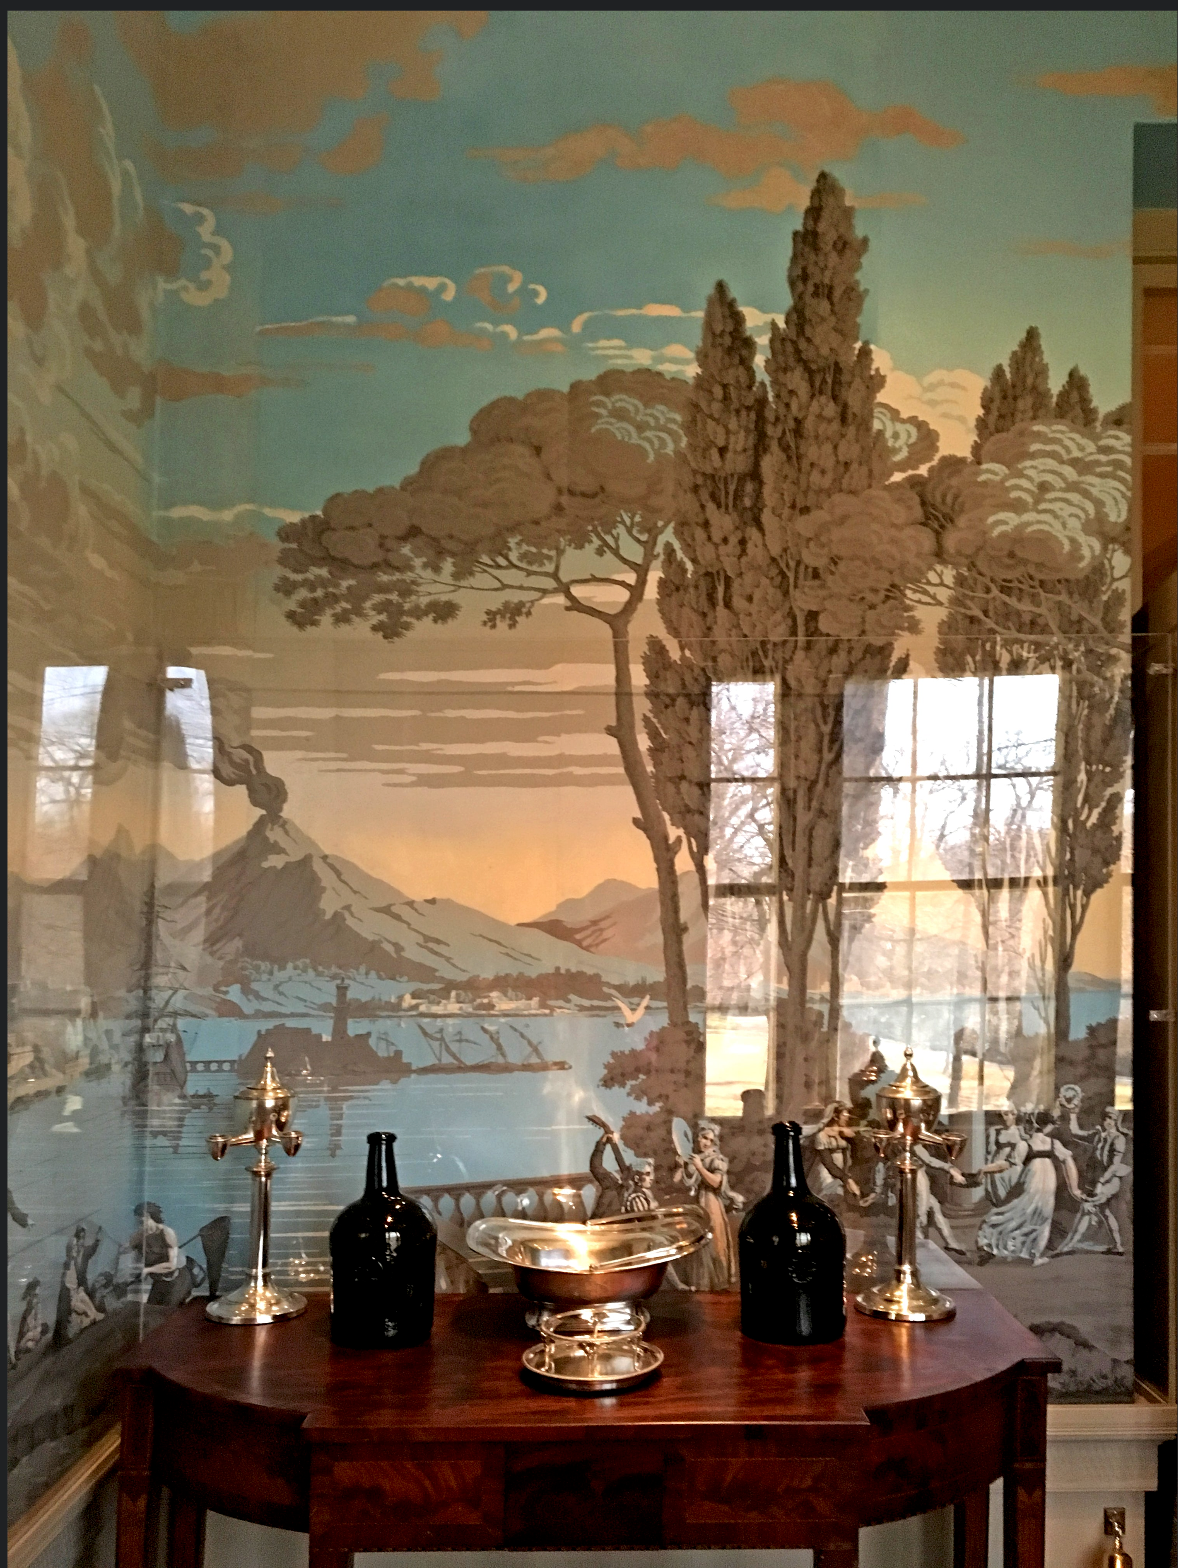 Views of Italy scenic wallpaper panorama (3 of 3), now at The Berkshire Galleries